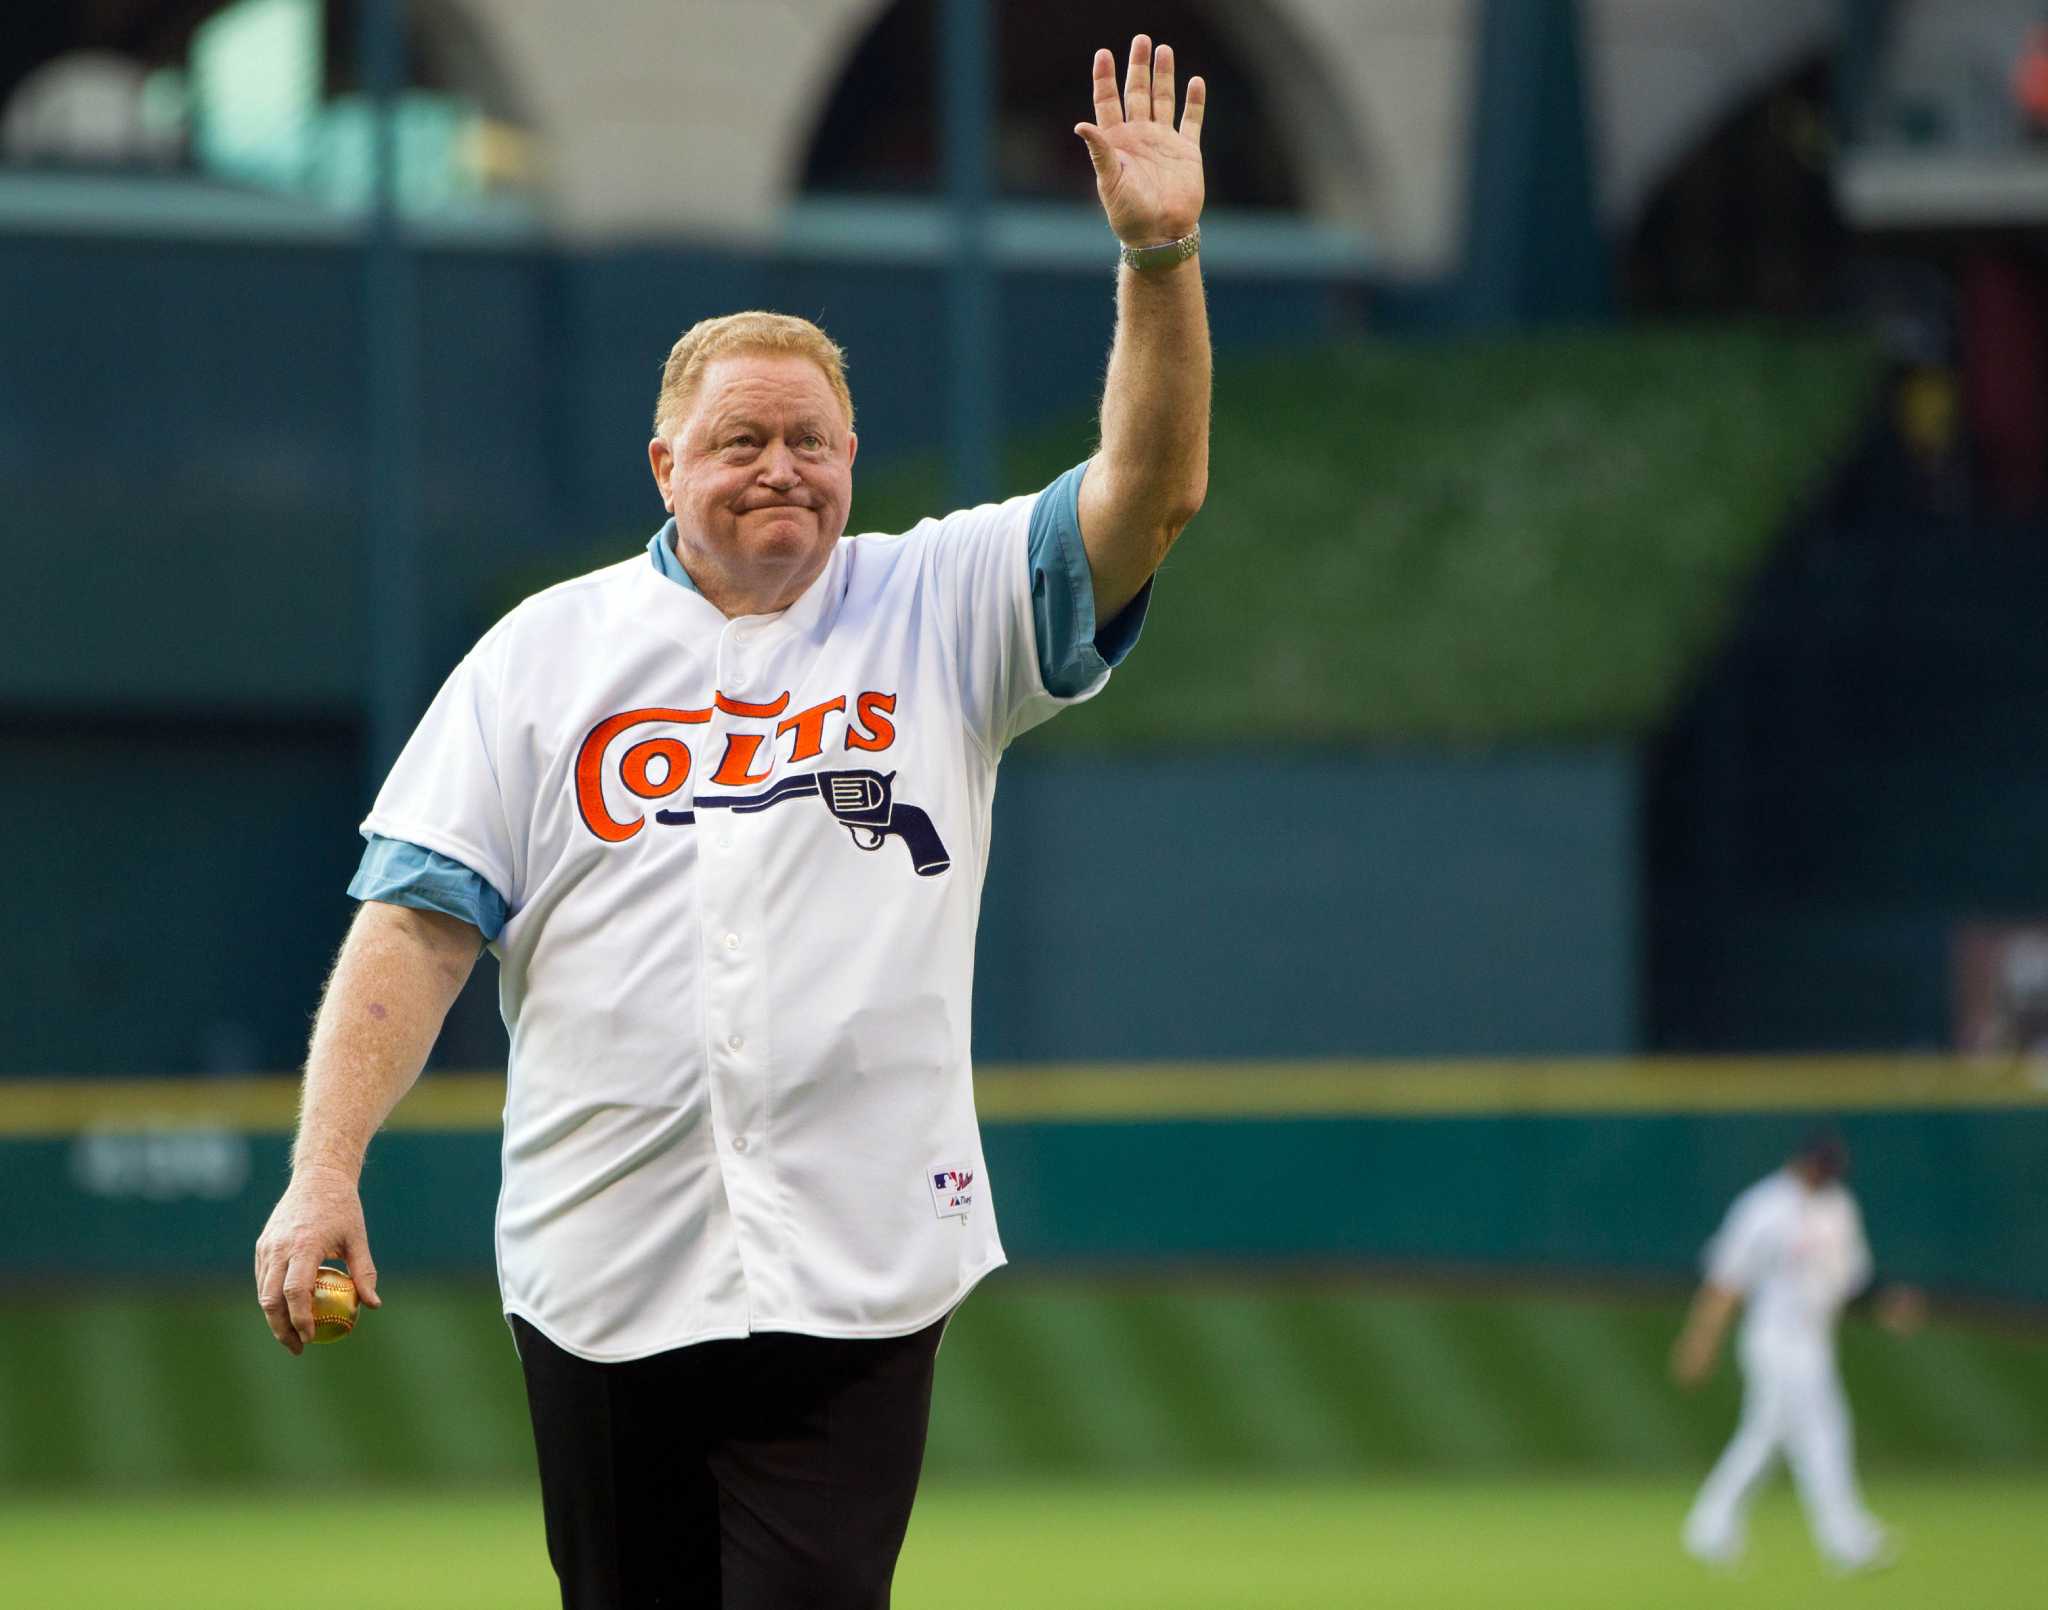 Rusty Staub, beloved Mets slugger who broke into majors with Colt .45s/Astros, dies at ...